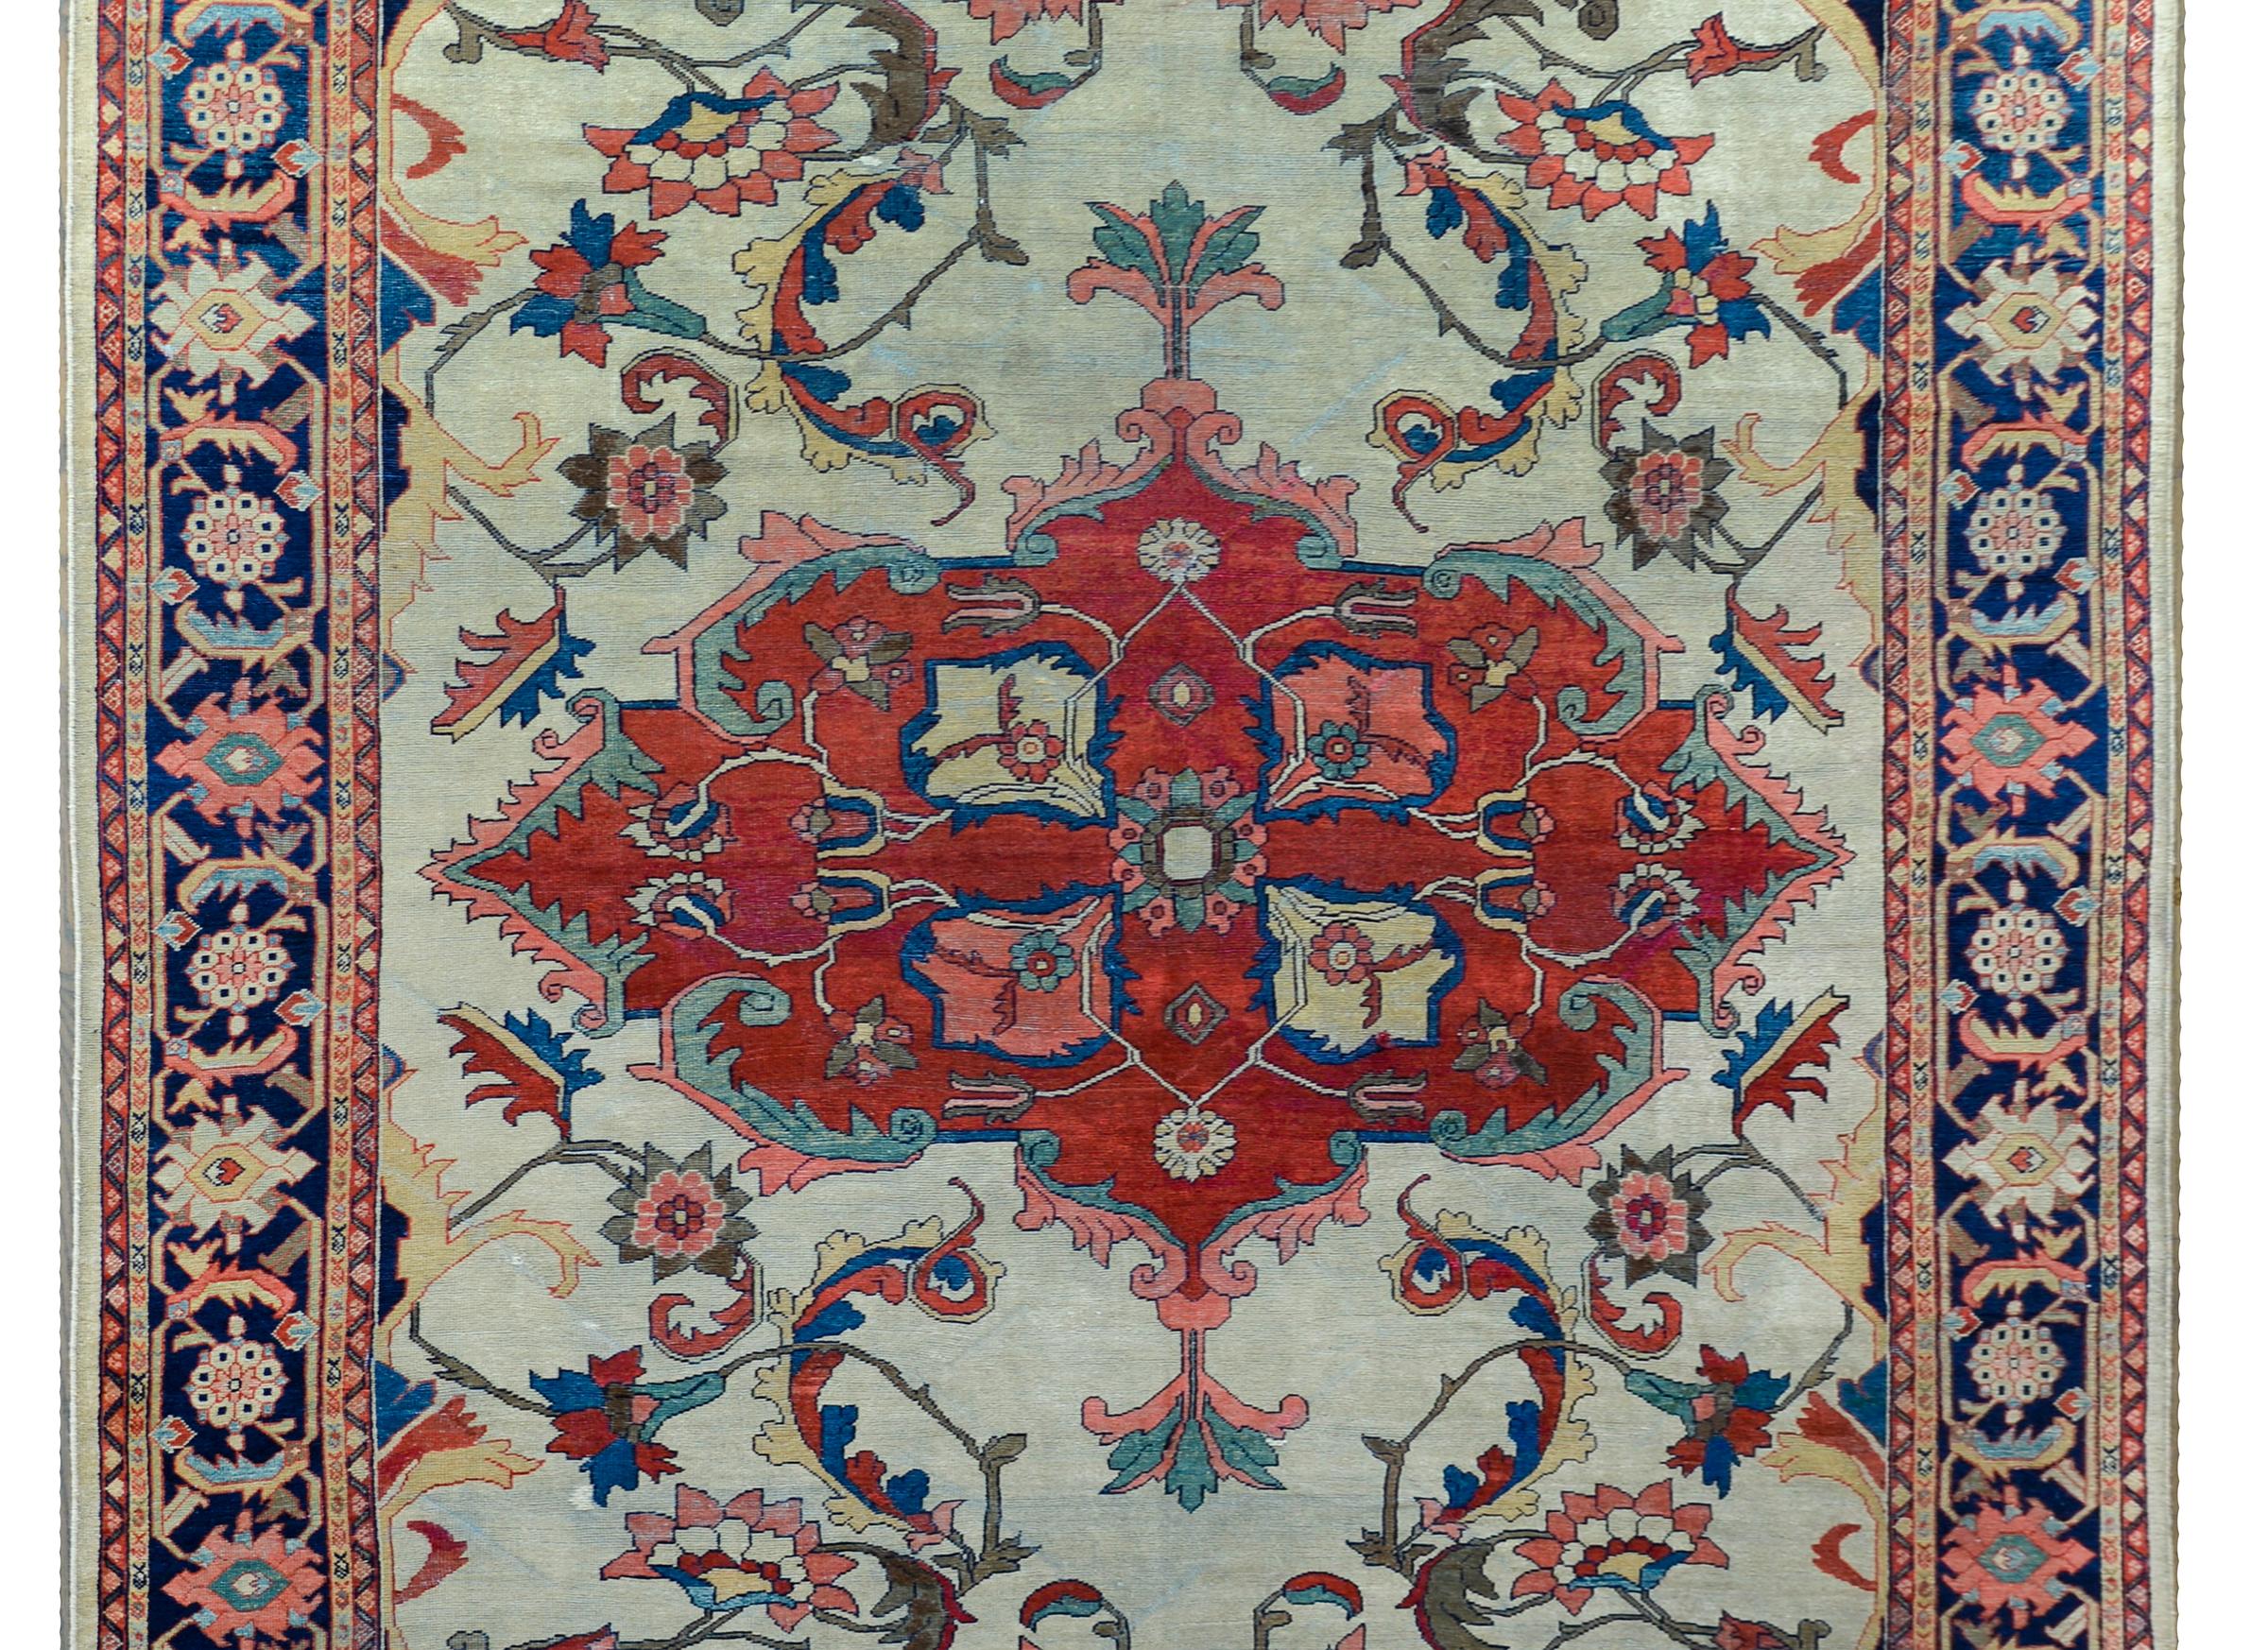 An incredible late 19th century Persian Sultanabad with the best large-scale crimson medallion with stylized flowers and scrolling vines, against a white background with more scrolling leaves and flowers. The border is wide with even more